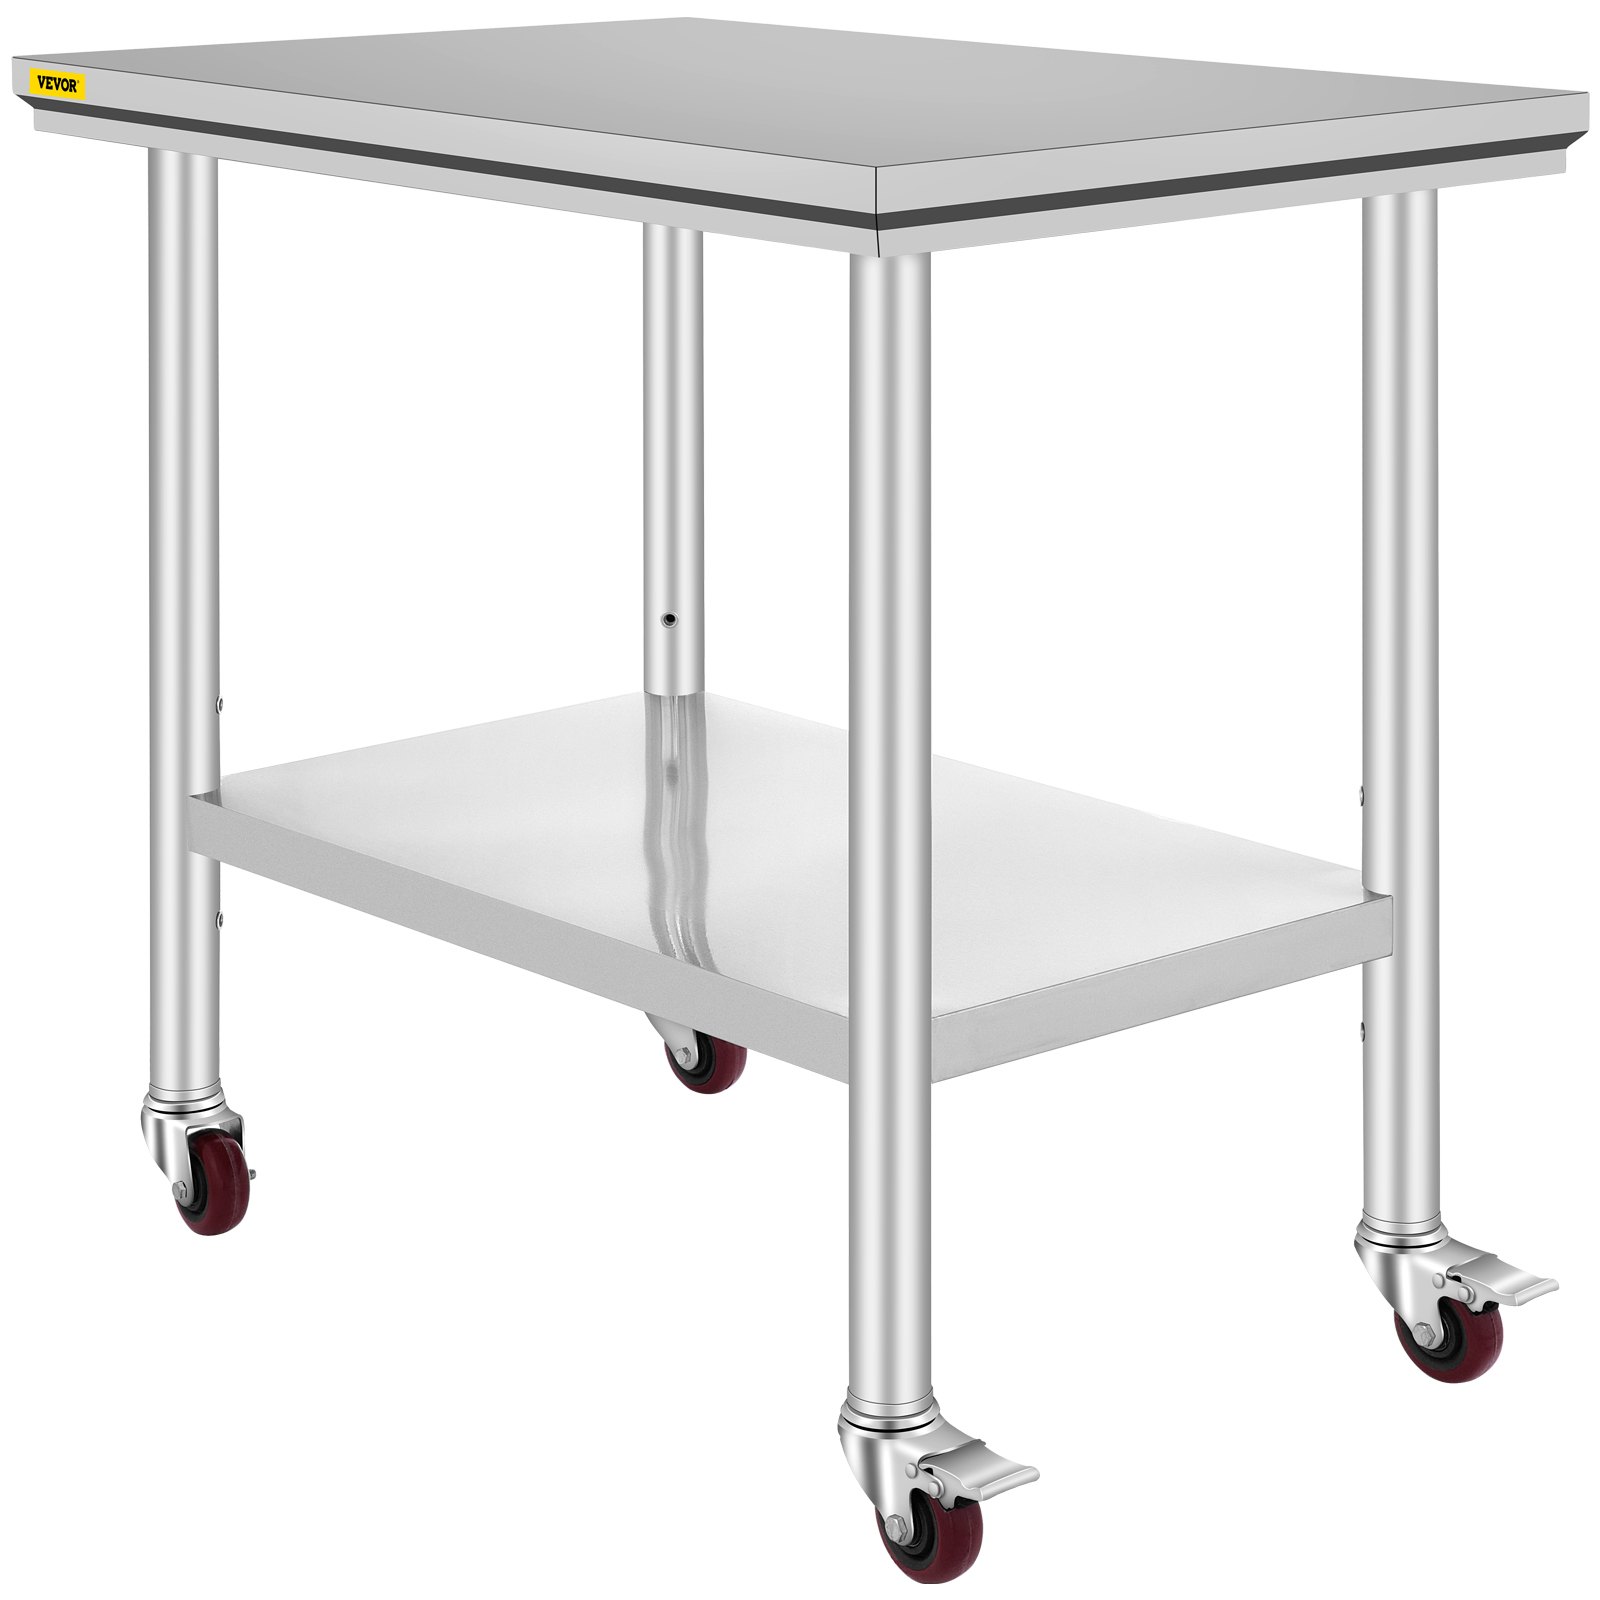 VEVOR Stainless Steel Work Table 36x24 Inch with 4 Wheels Commercial ...